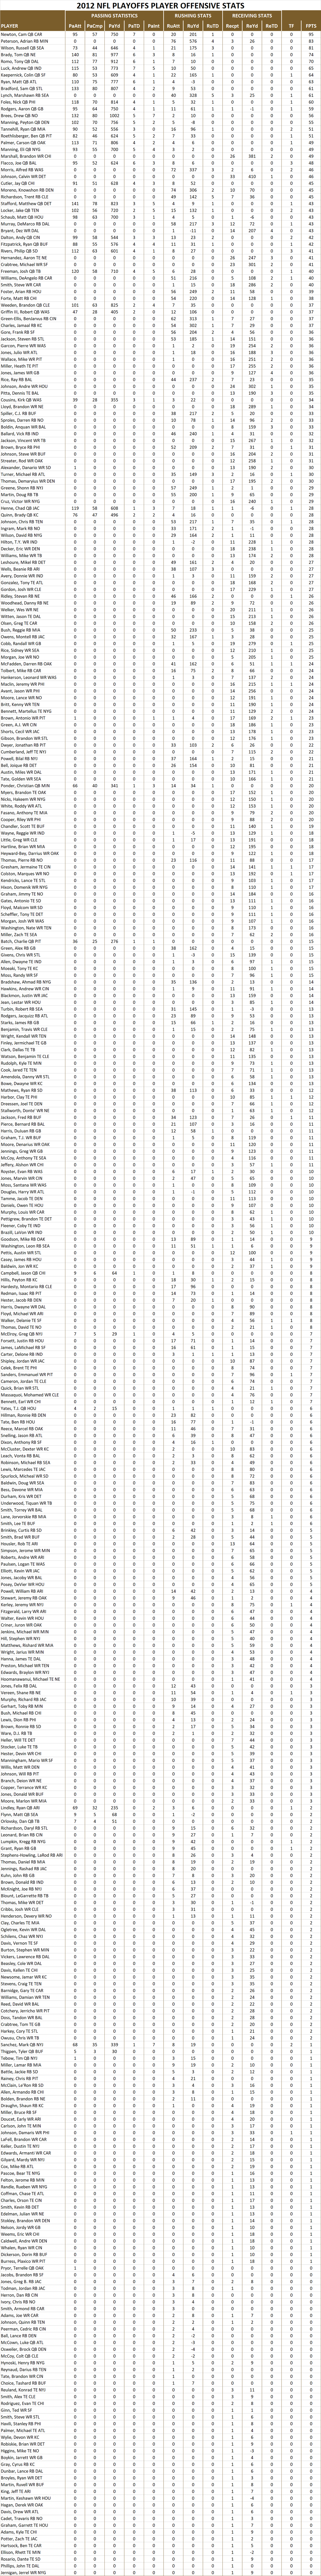 2012 National Football League Pool Playoff Player Offensive Stats